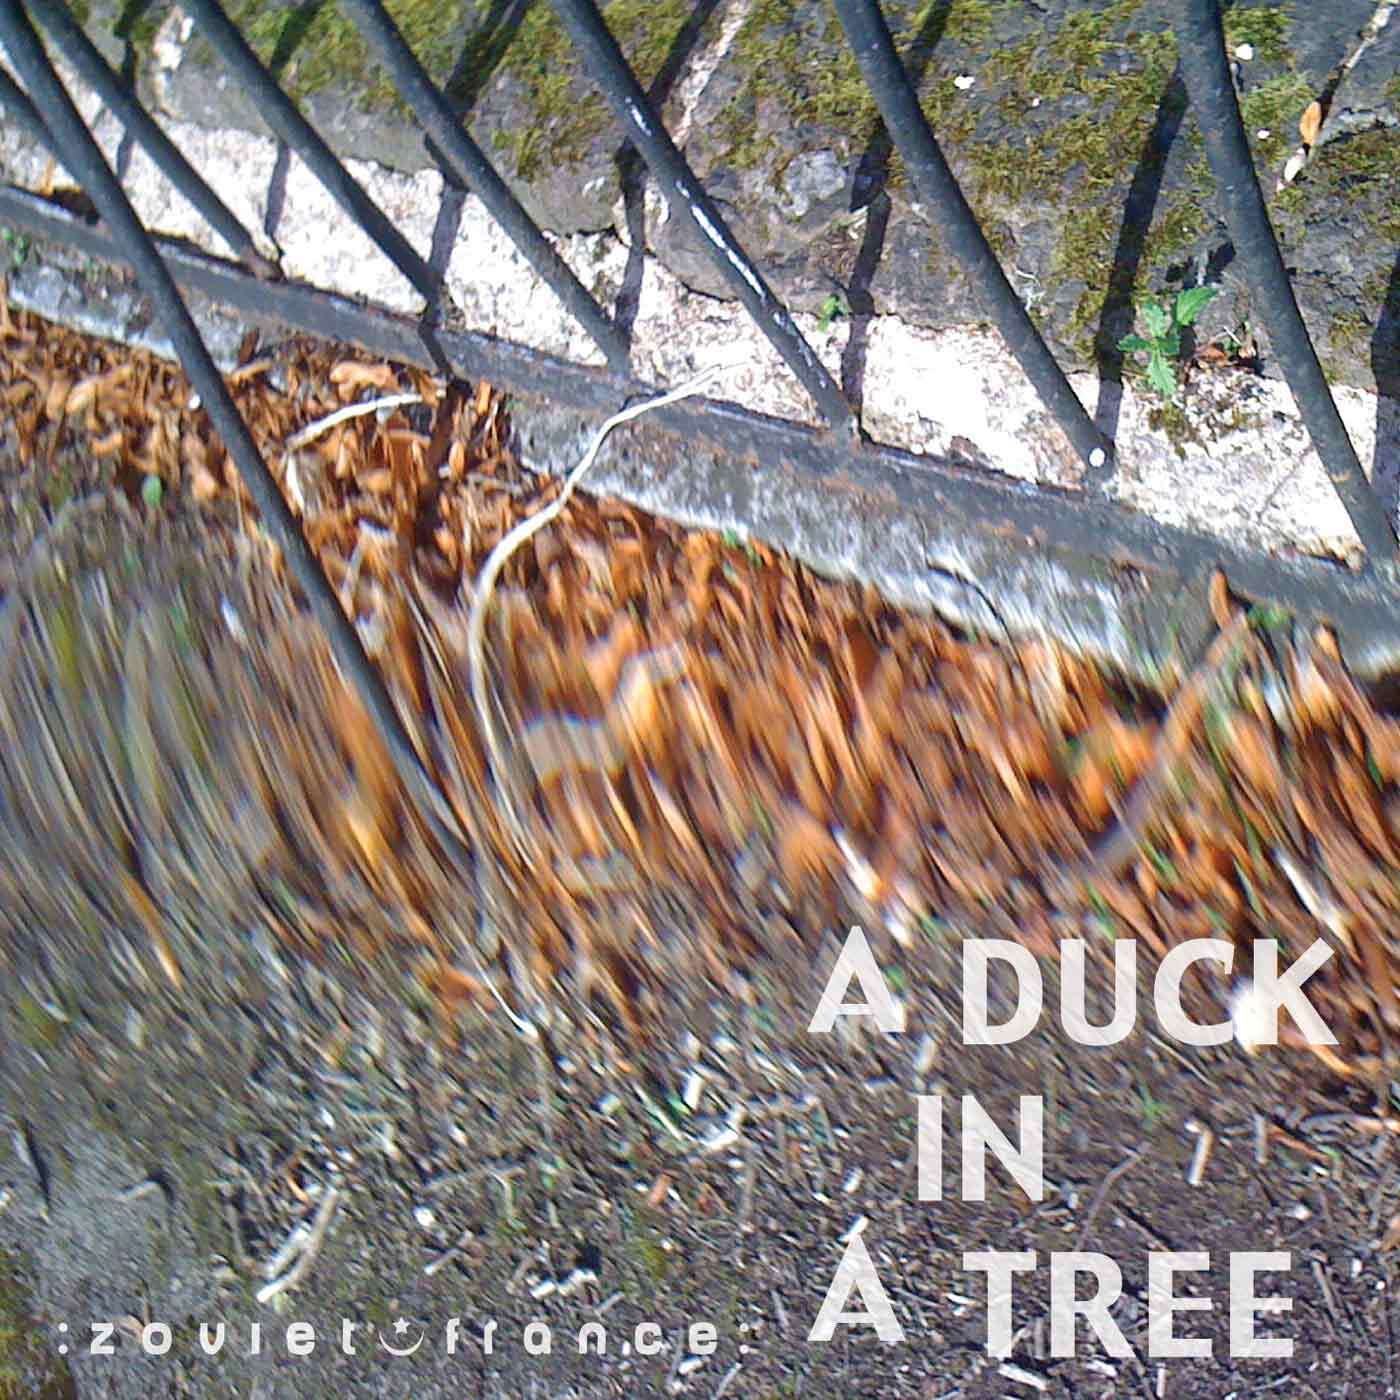 A-Duck-in-a-Tree-2013-06-01-_-A-Number-Past-a-Note-Past-a-Letter-layout-1400.jpg